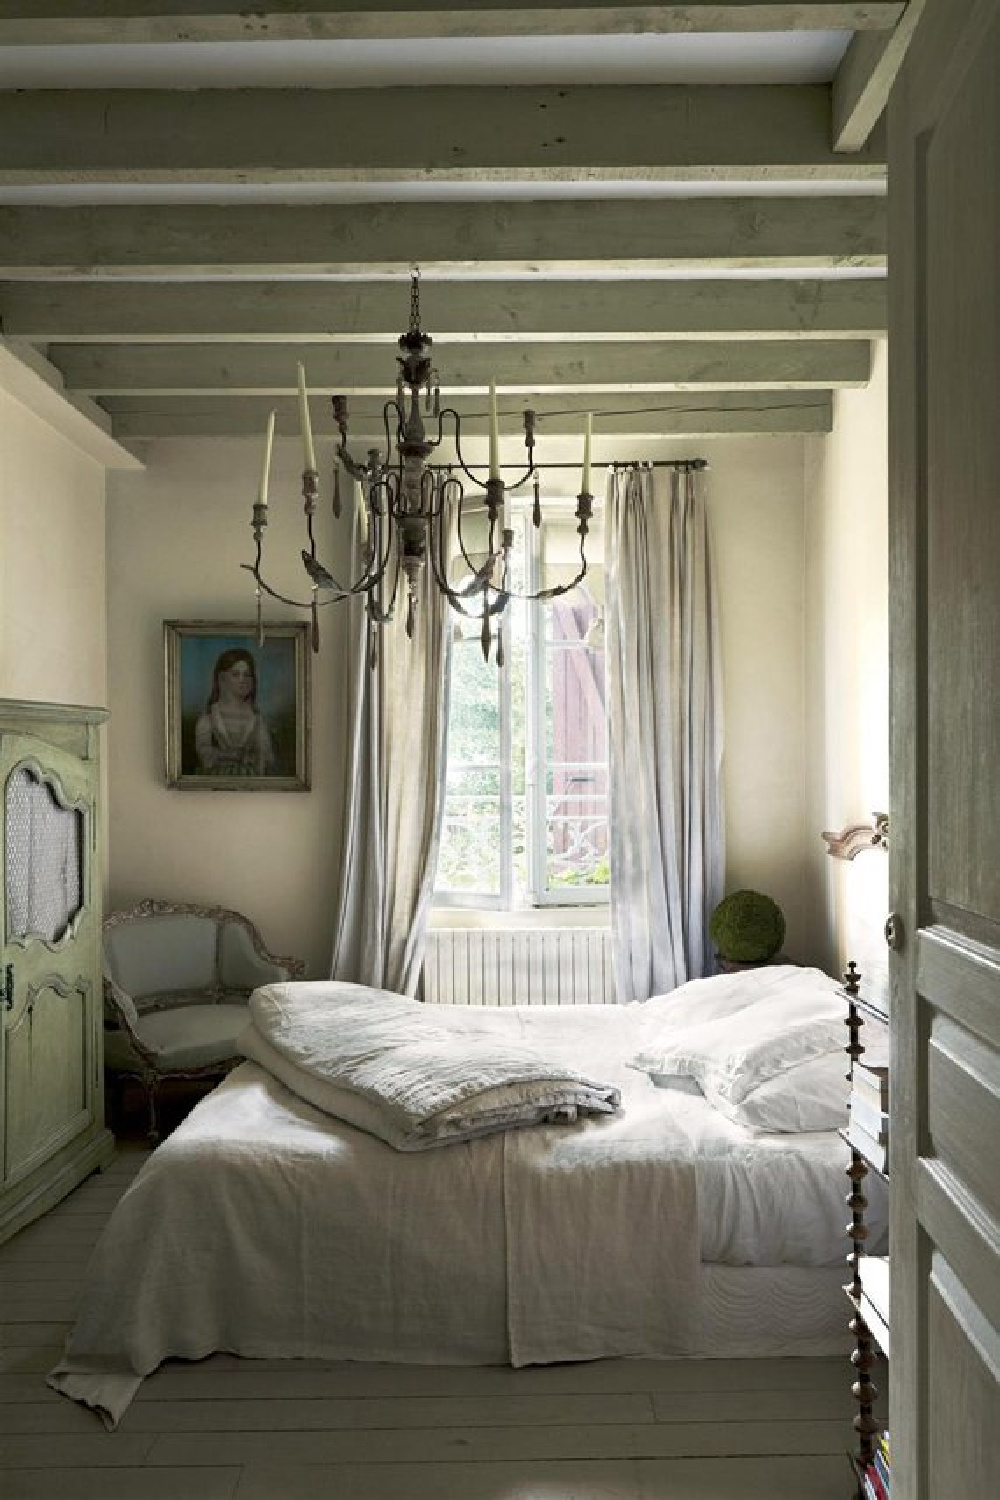 Ball Green by Farrow & Ball paint on the ceiling of a beautiful French country bedroom with chandelier and beams. #frenchcountry #frenchfarmhouse #interiordesign #farrowandball #ballgreen #paintcolors